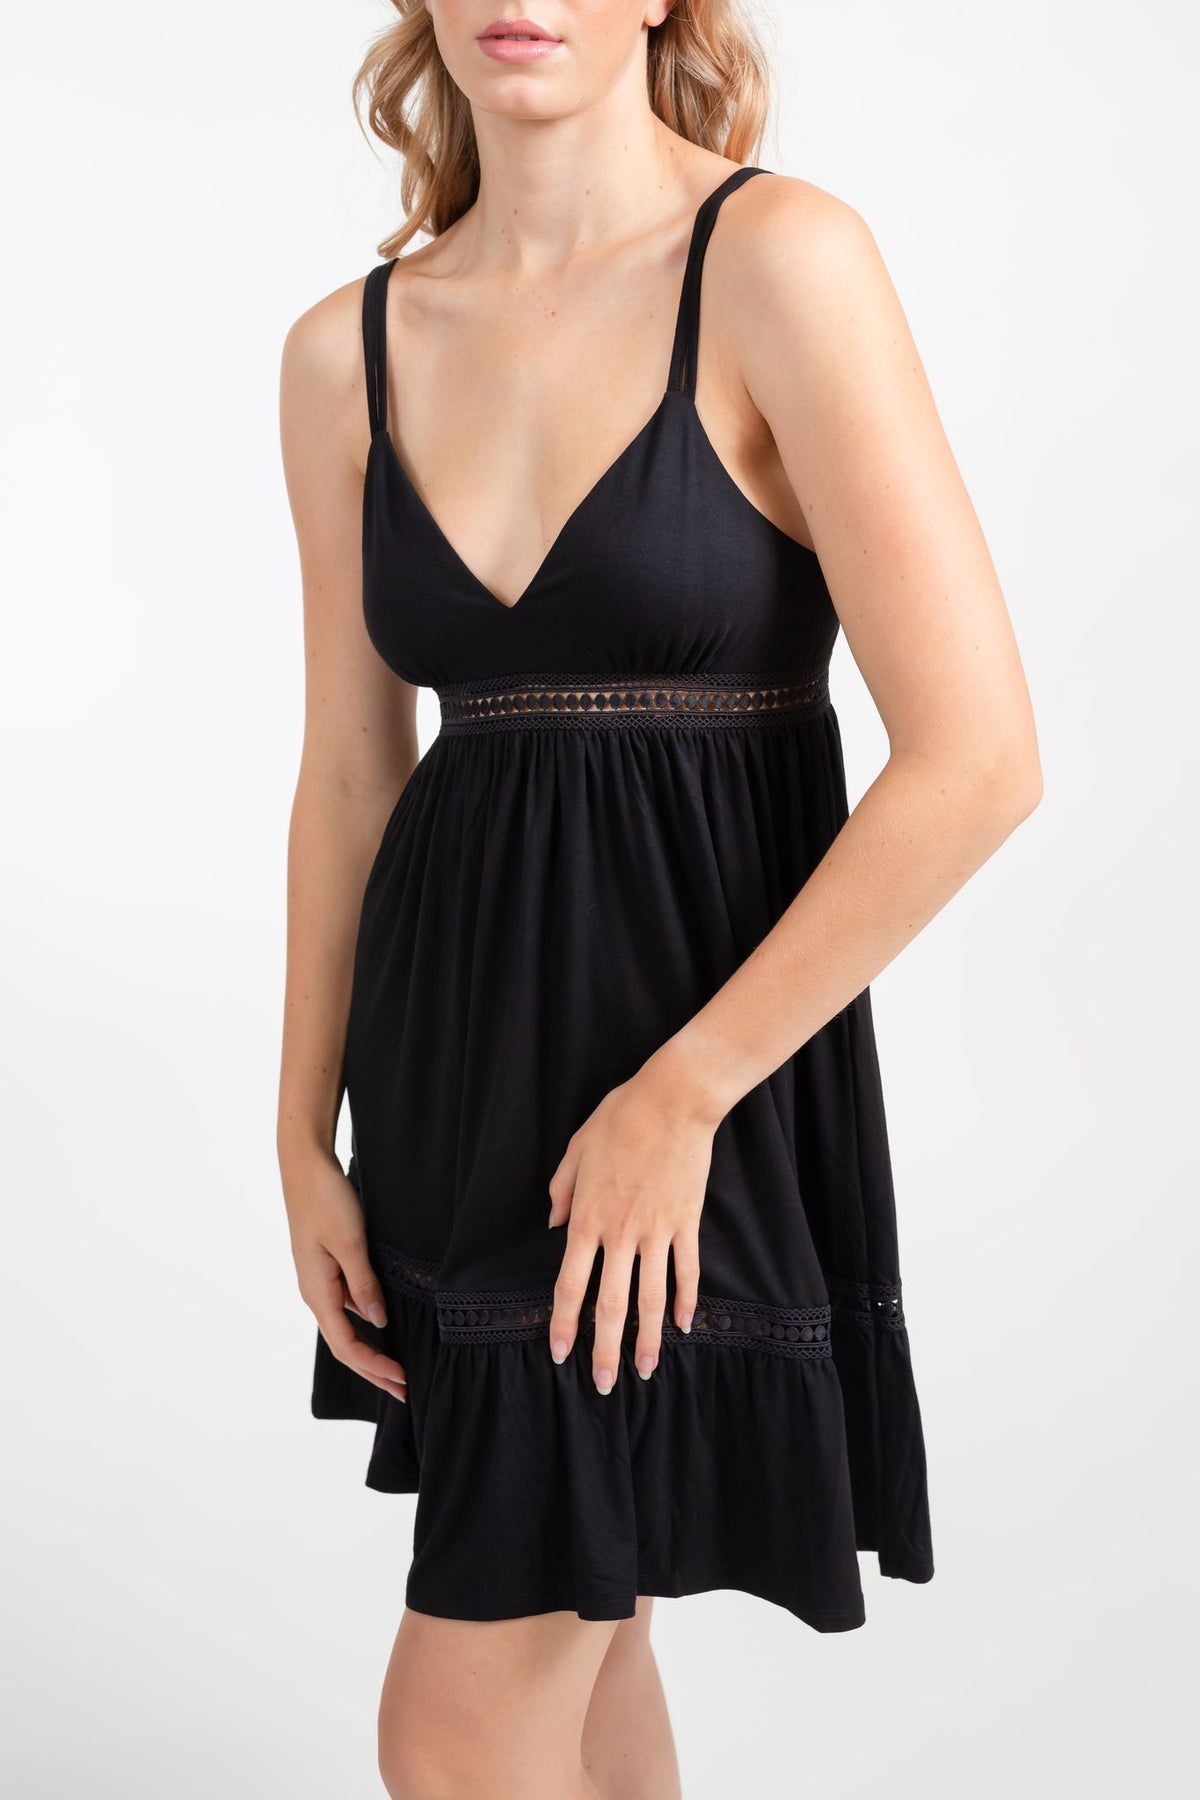 a zoomed in shot of a blonde hair women model wearing a black strappy v-neck crochet trim dress with both hands in the front